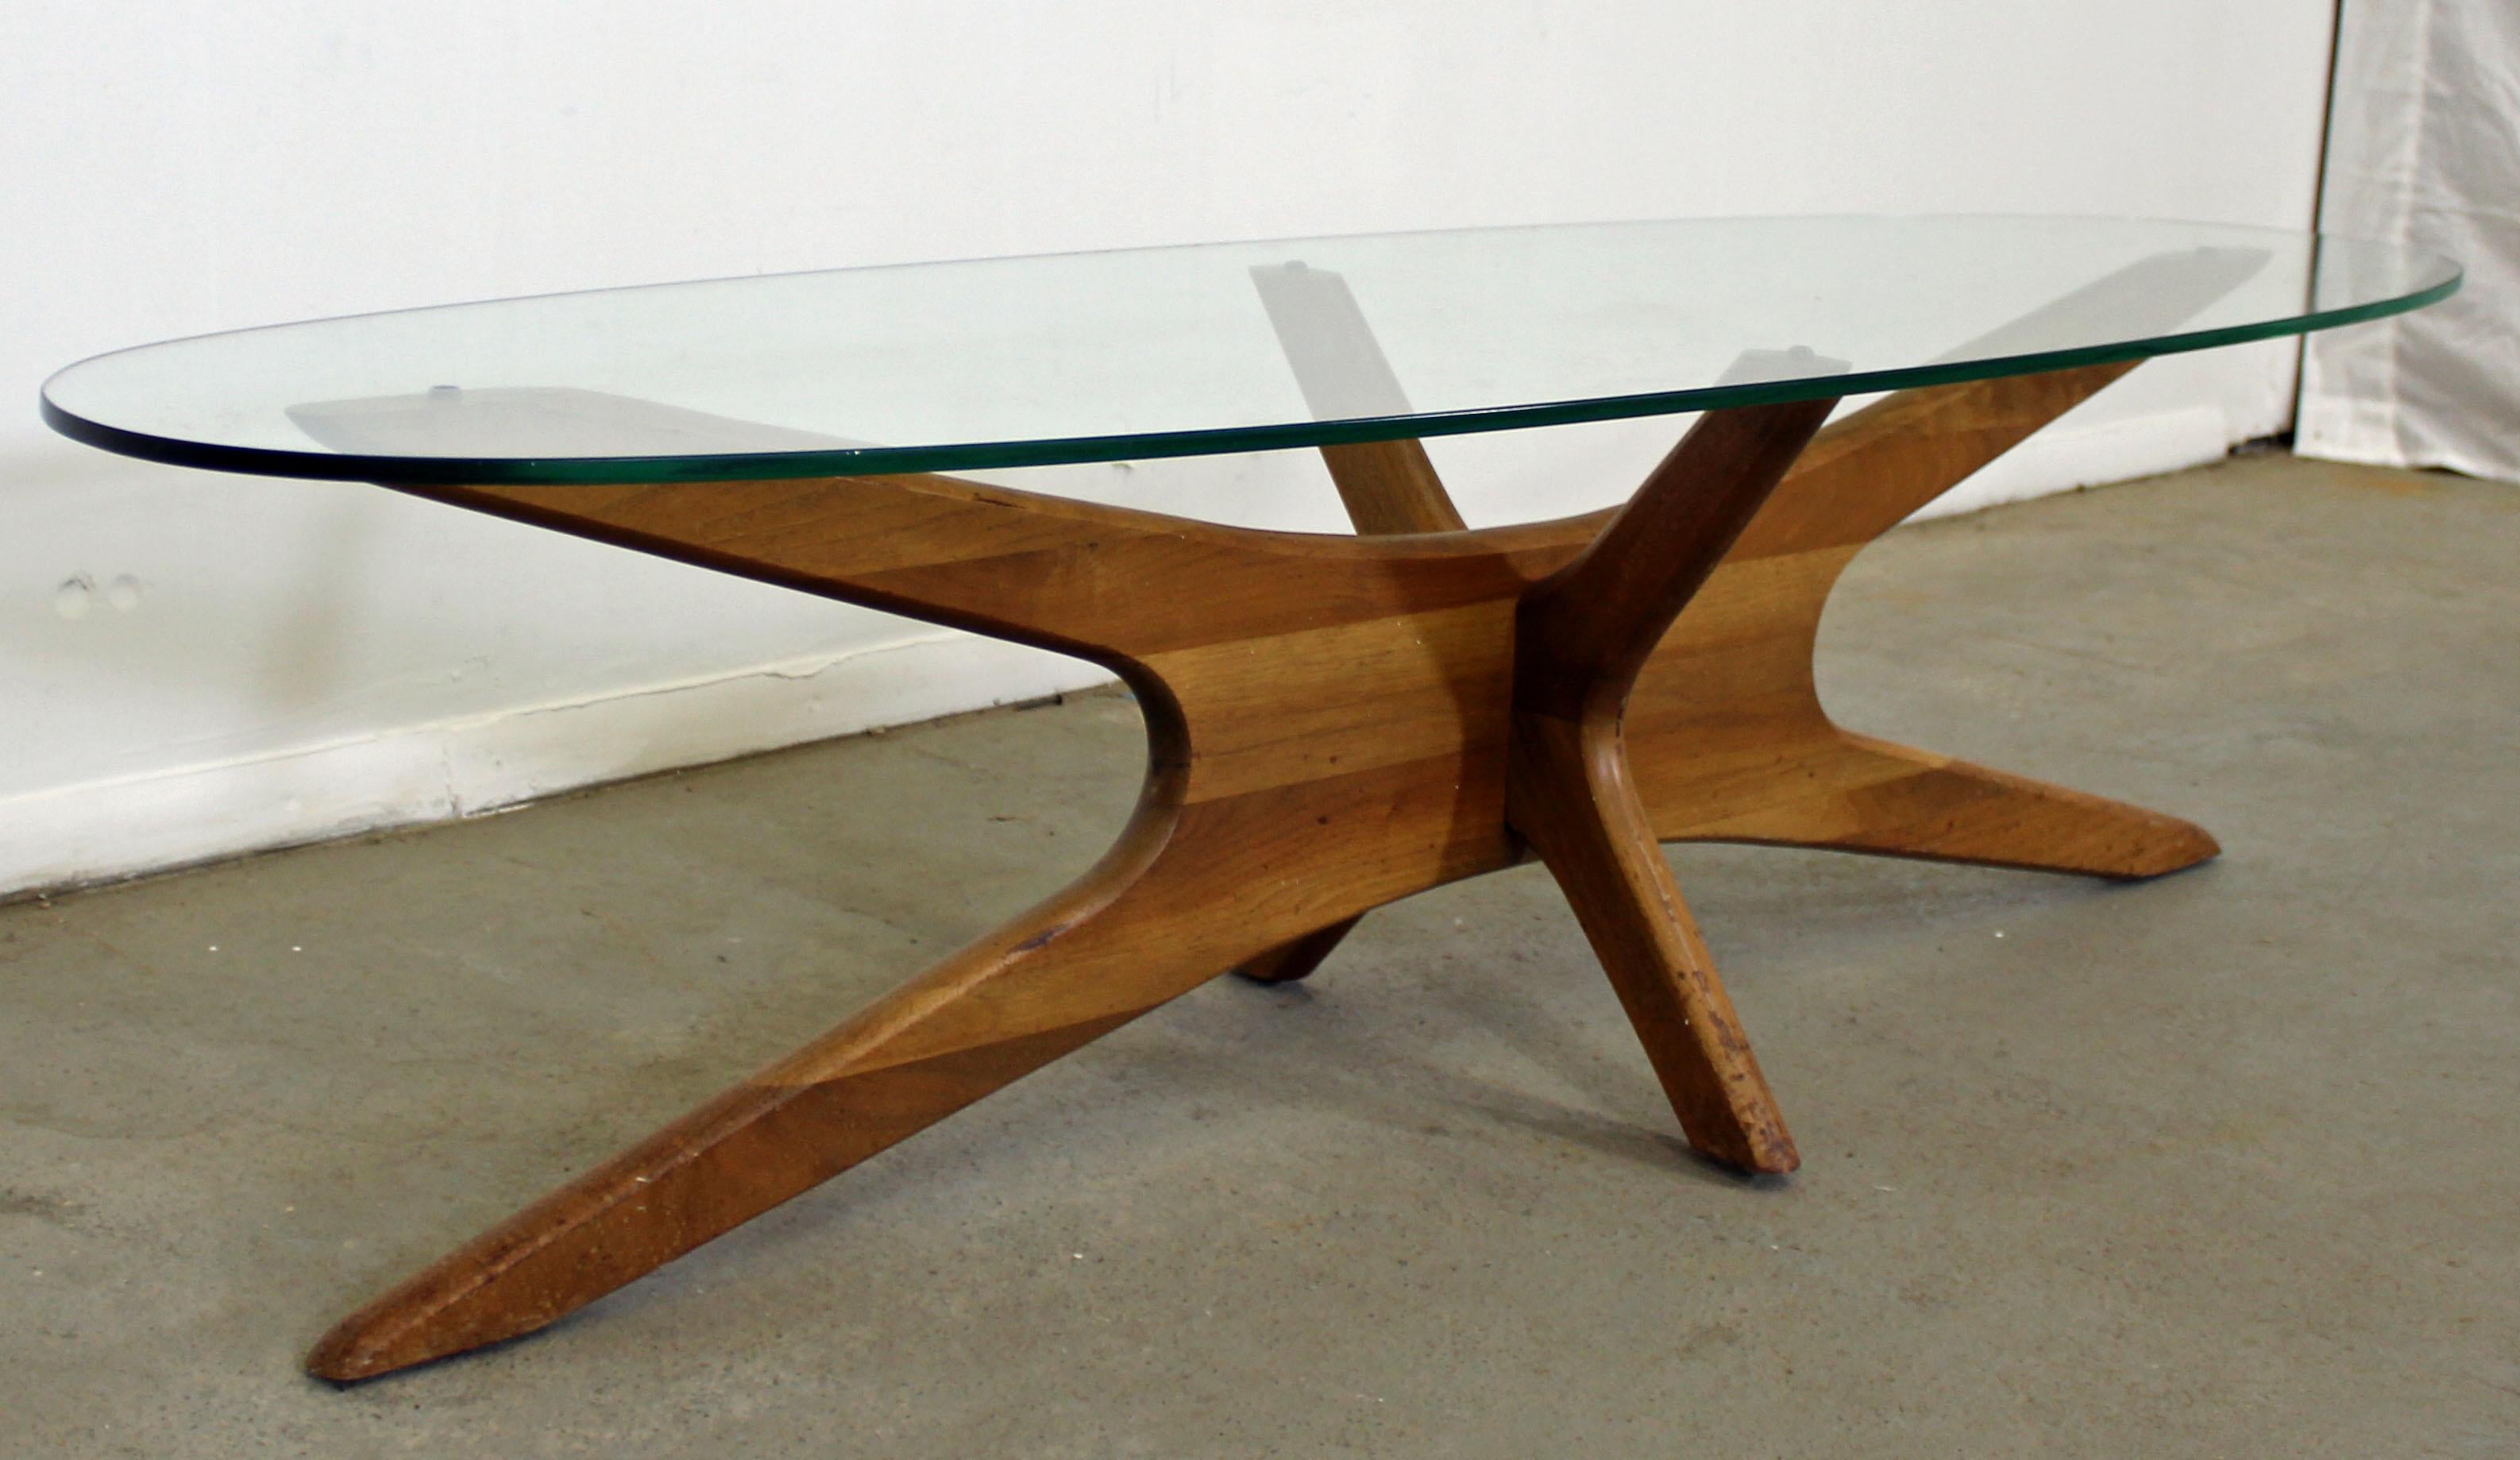 Offered is an authentic Adrian Pearsall 'Jacks' coffee table with a sculpted wooden base and thick glass top. In good condition for its age, minor surface wear. It is not signed. A great piece to add to any room! See our other listings for a